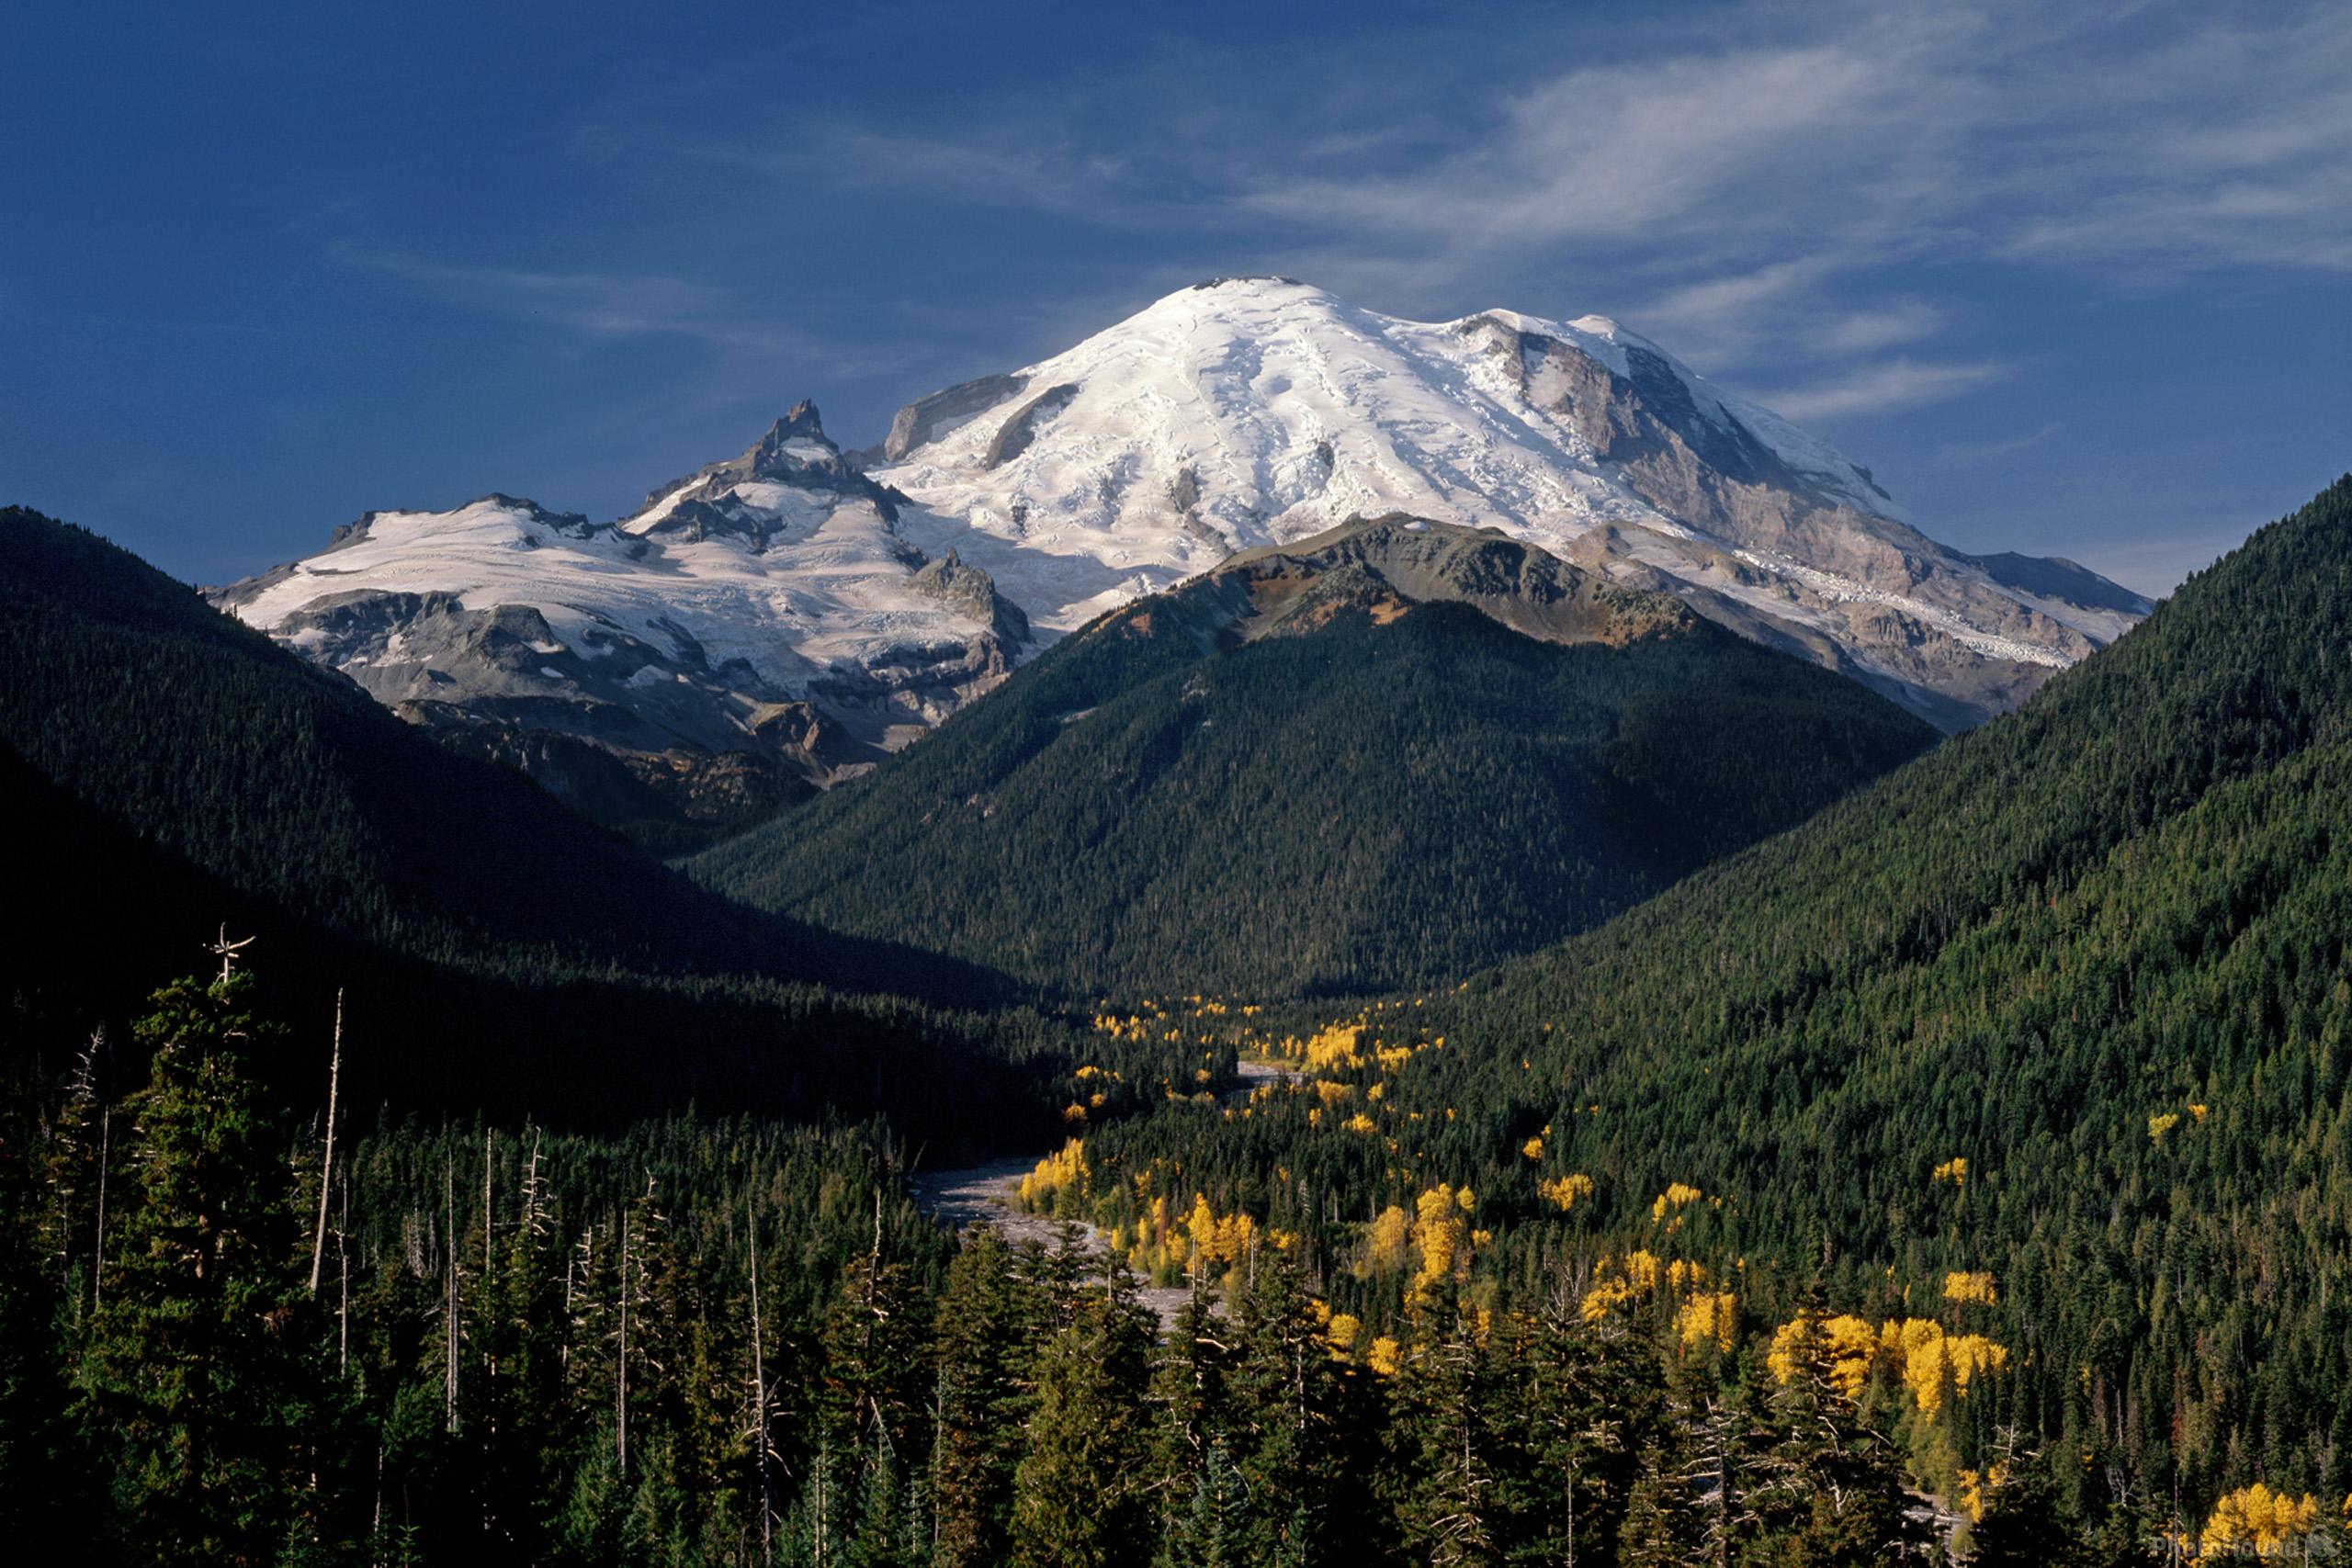 Image of White River Viewpoint, Mount Rainier National Park by T. Kirkendall and V. Spring